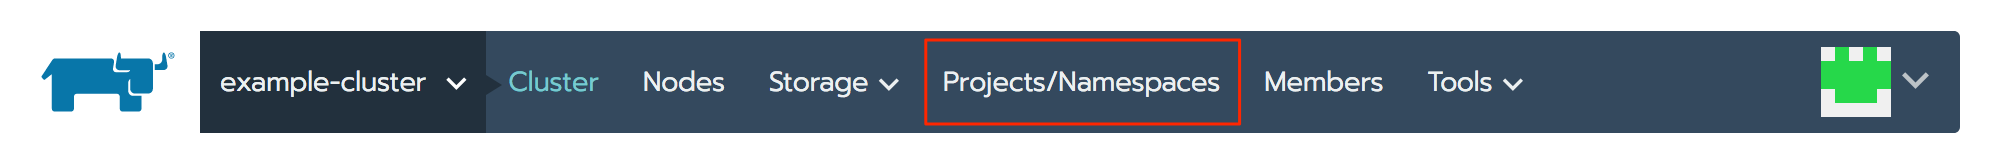 Rancher cluster navigation bar - Projects/Namespaces highlighted